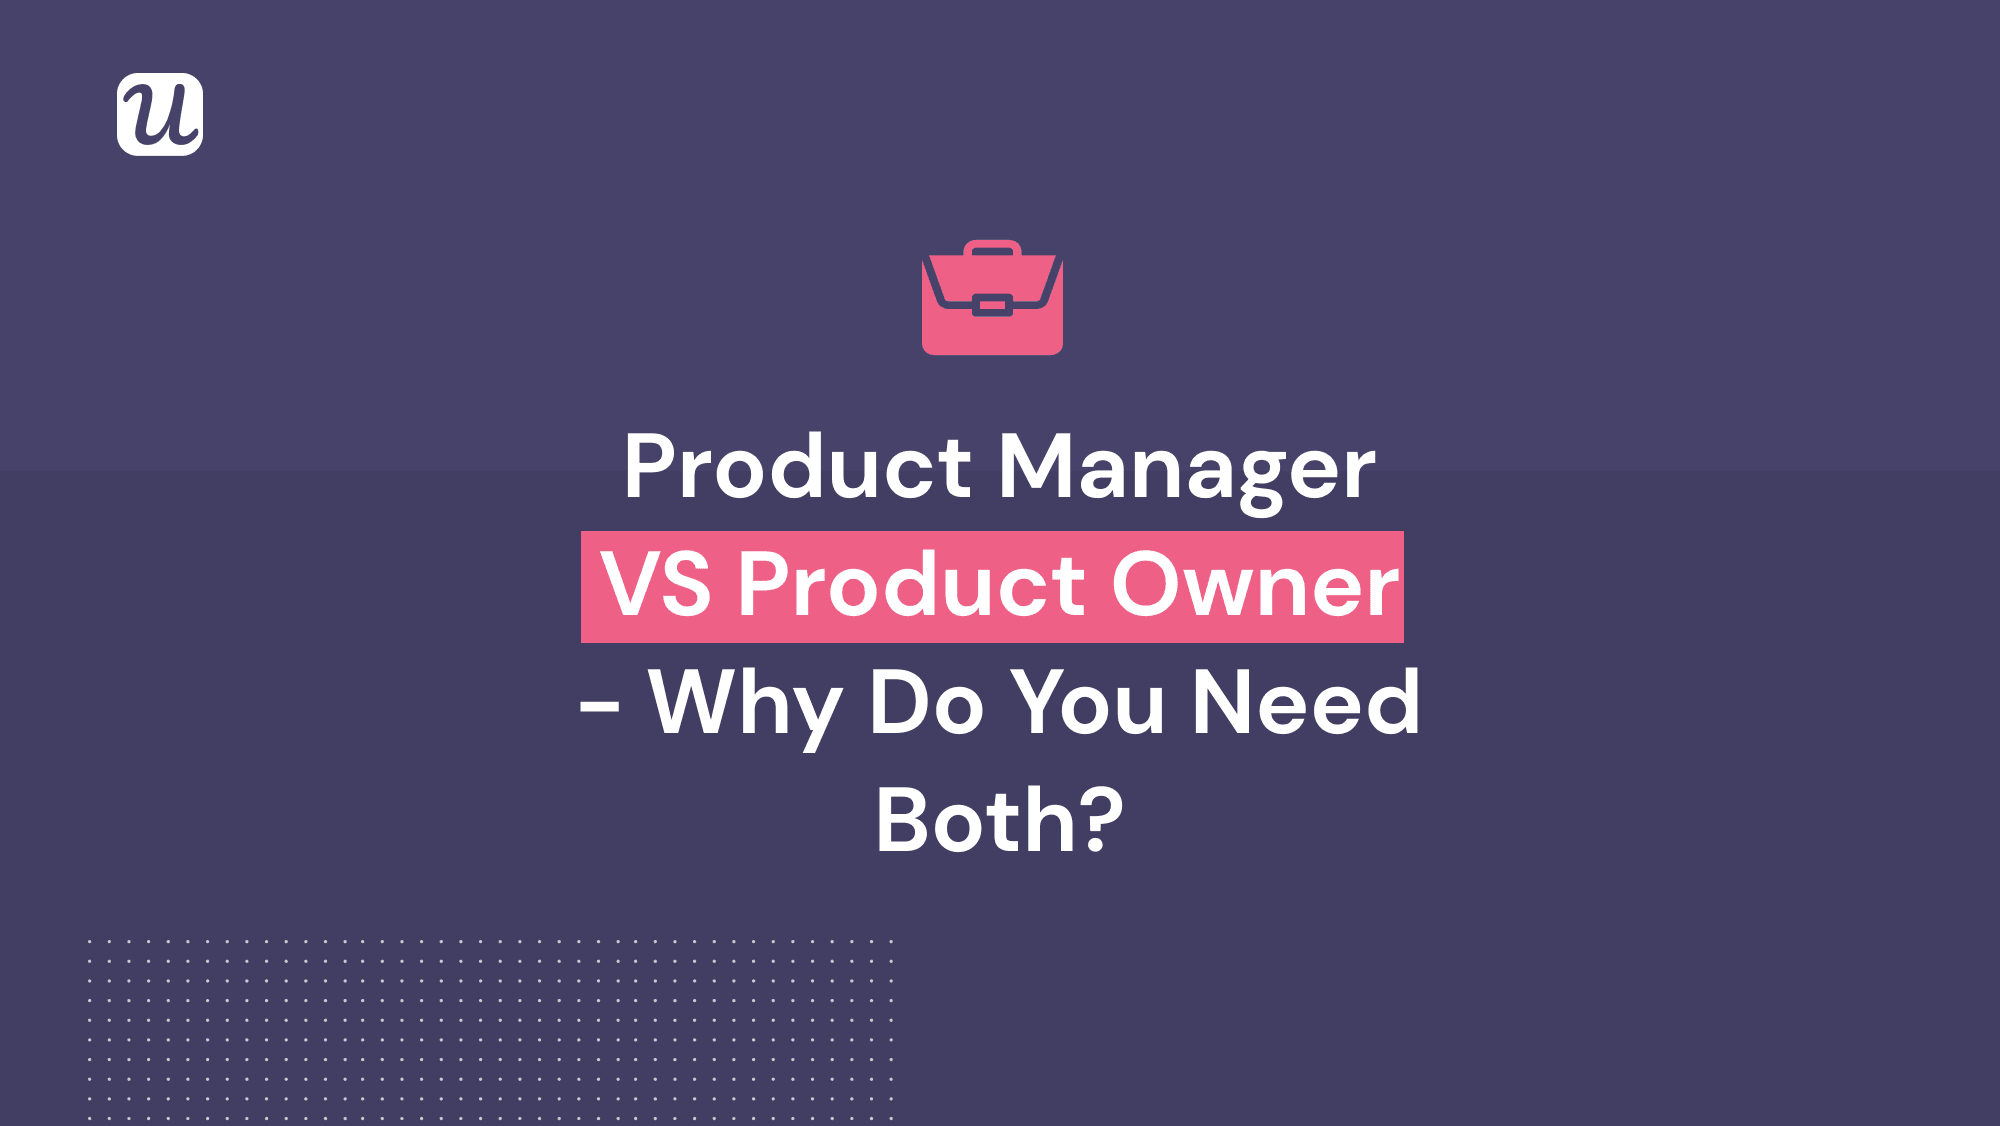 Product Owner vs. Product Manager: Differences, Role, Duties & Why You Need Both